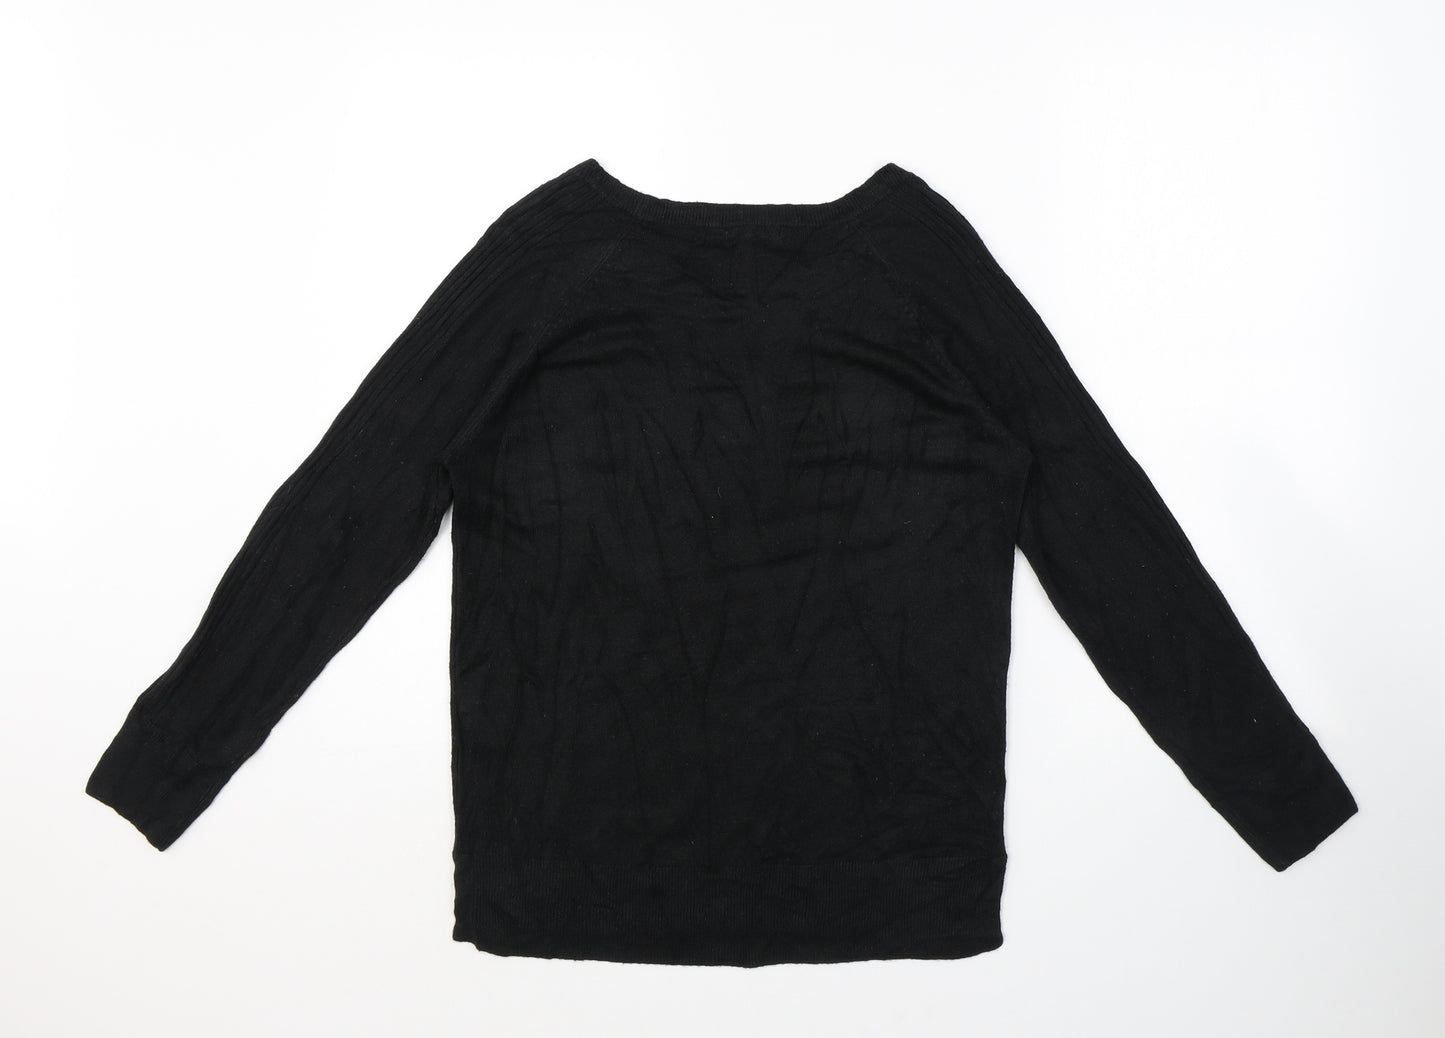 NEXT Womens Black Round Neck Acrylic Pullover Jumper Size 12